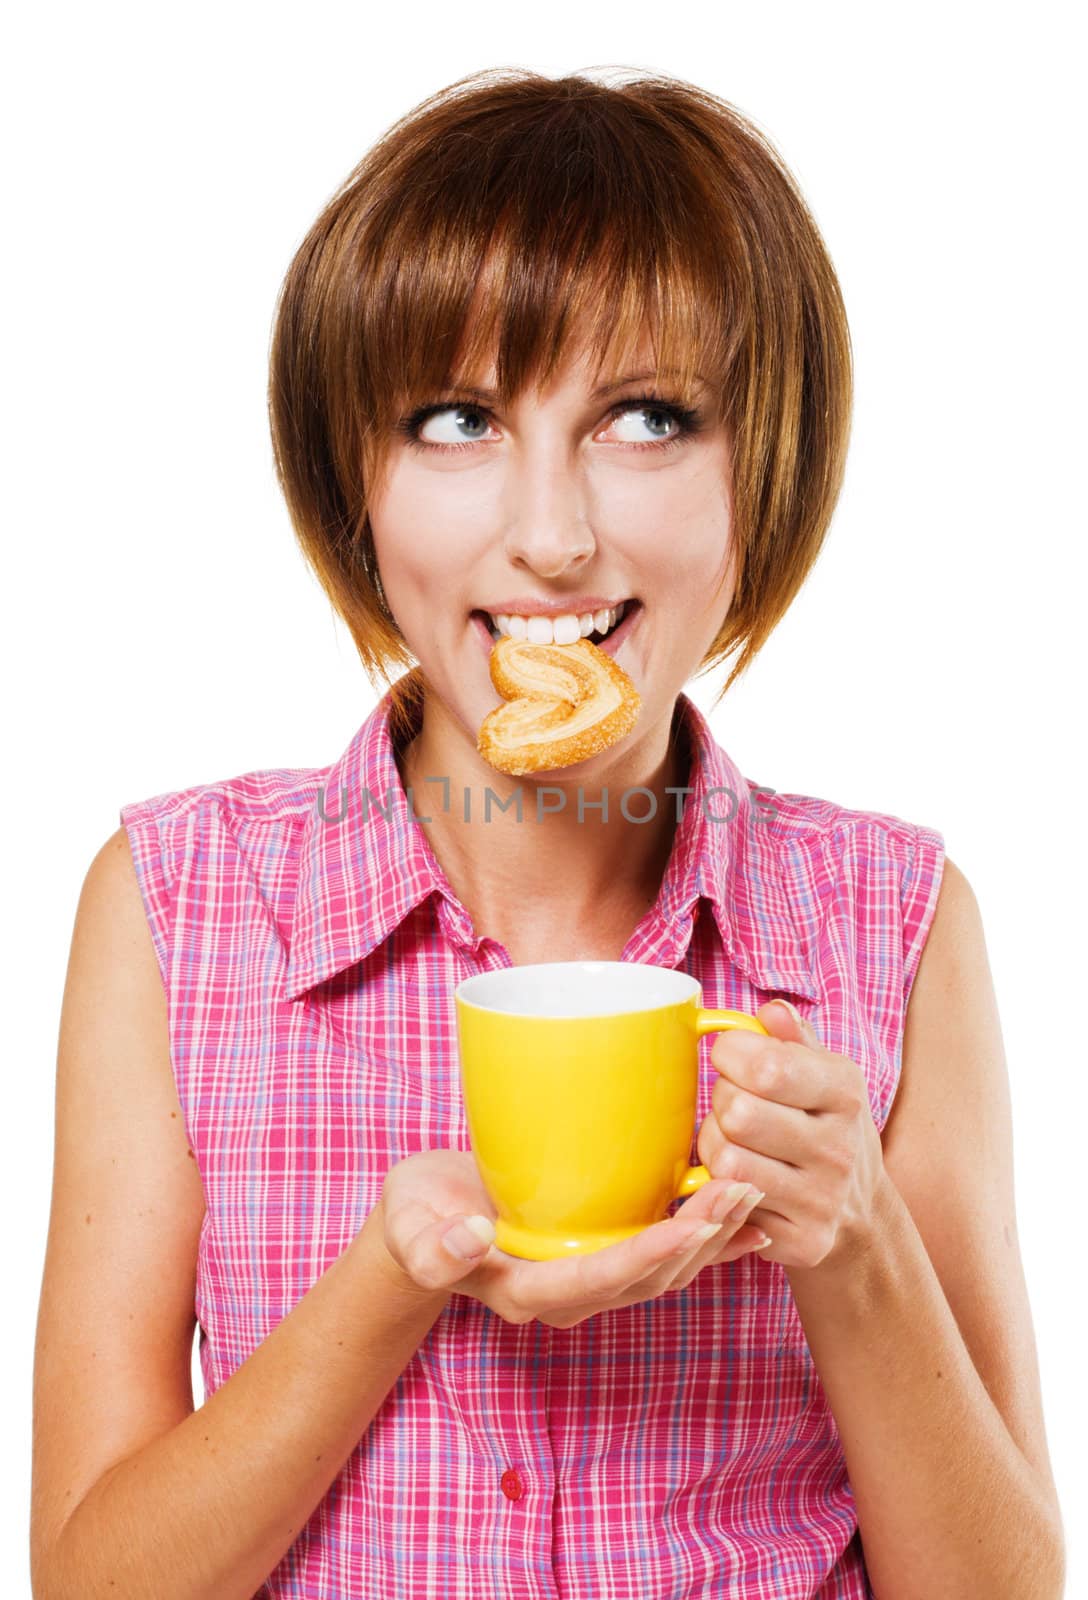 Cute girl with a tea cup biting a pretzel, white background 